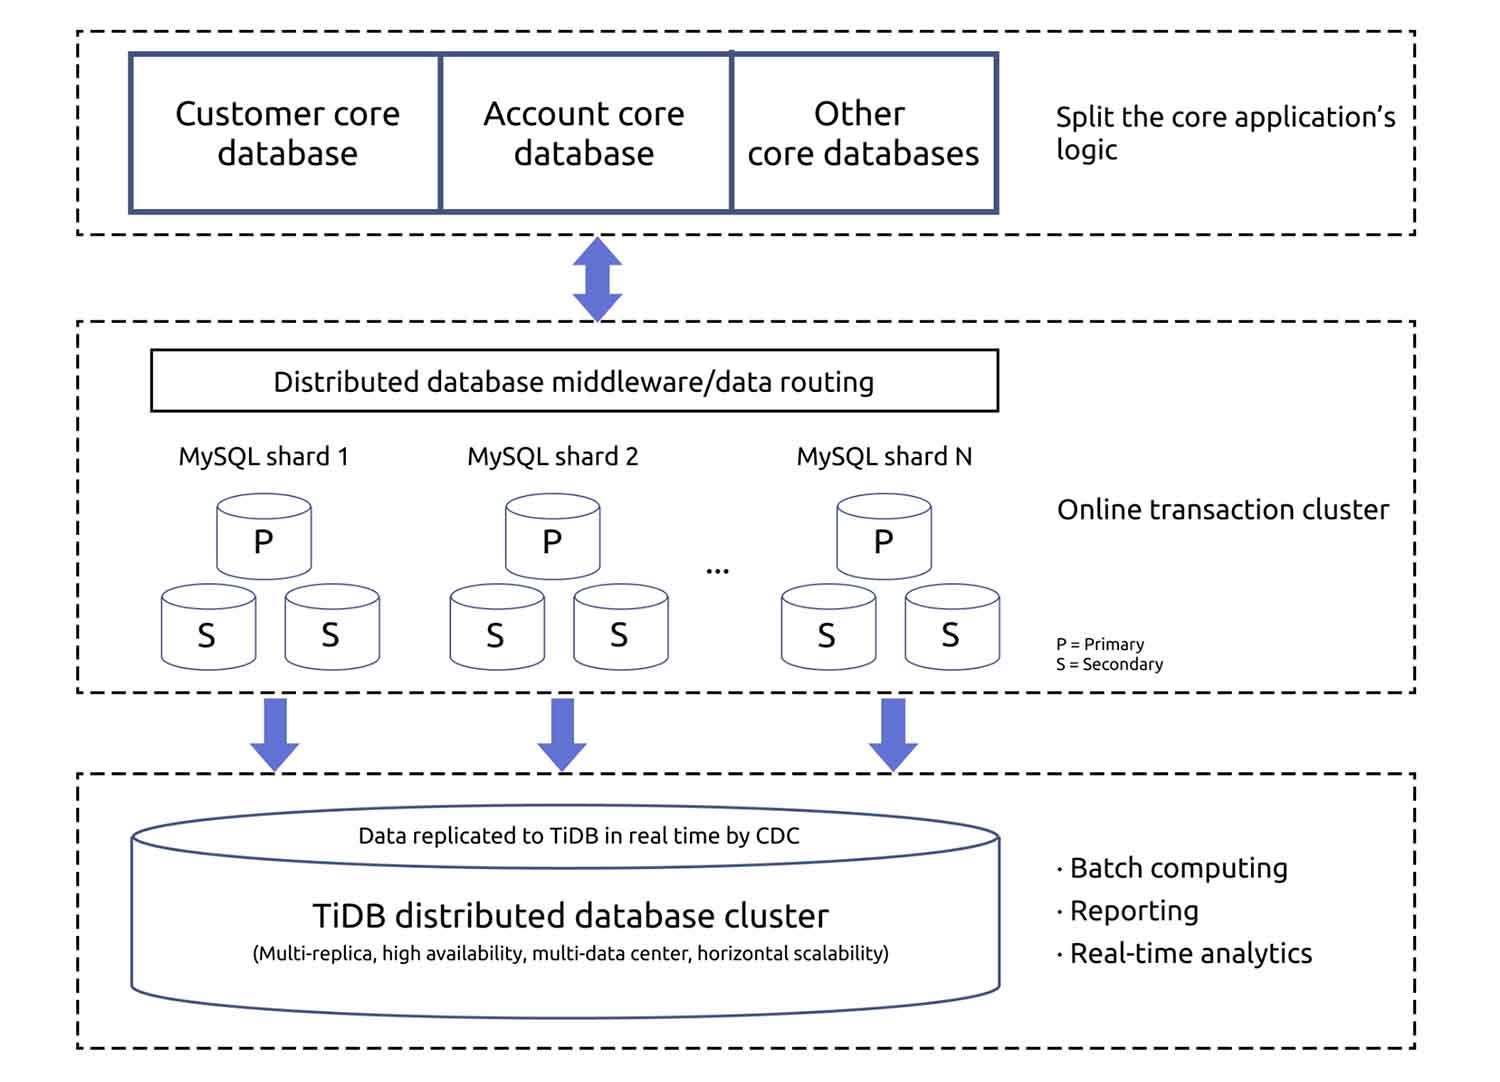 Use MySQL for online transactions with TiDB as the backend